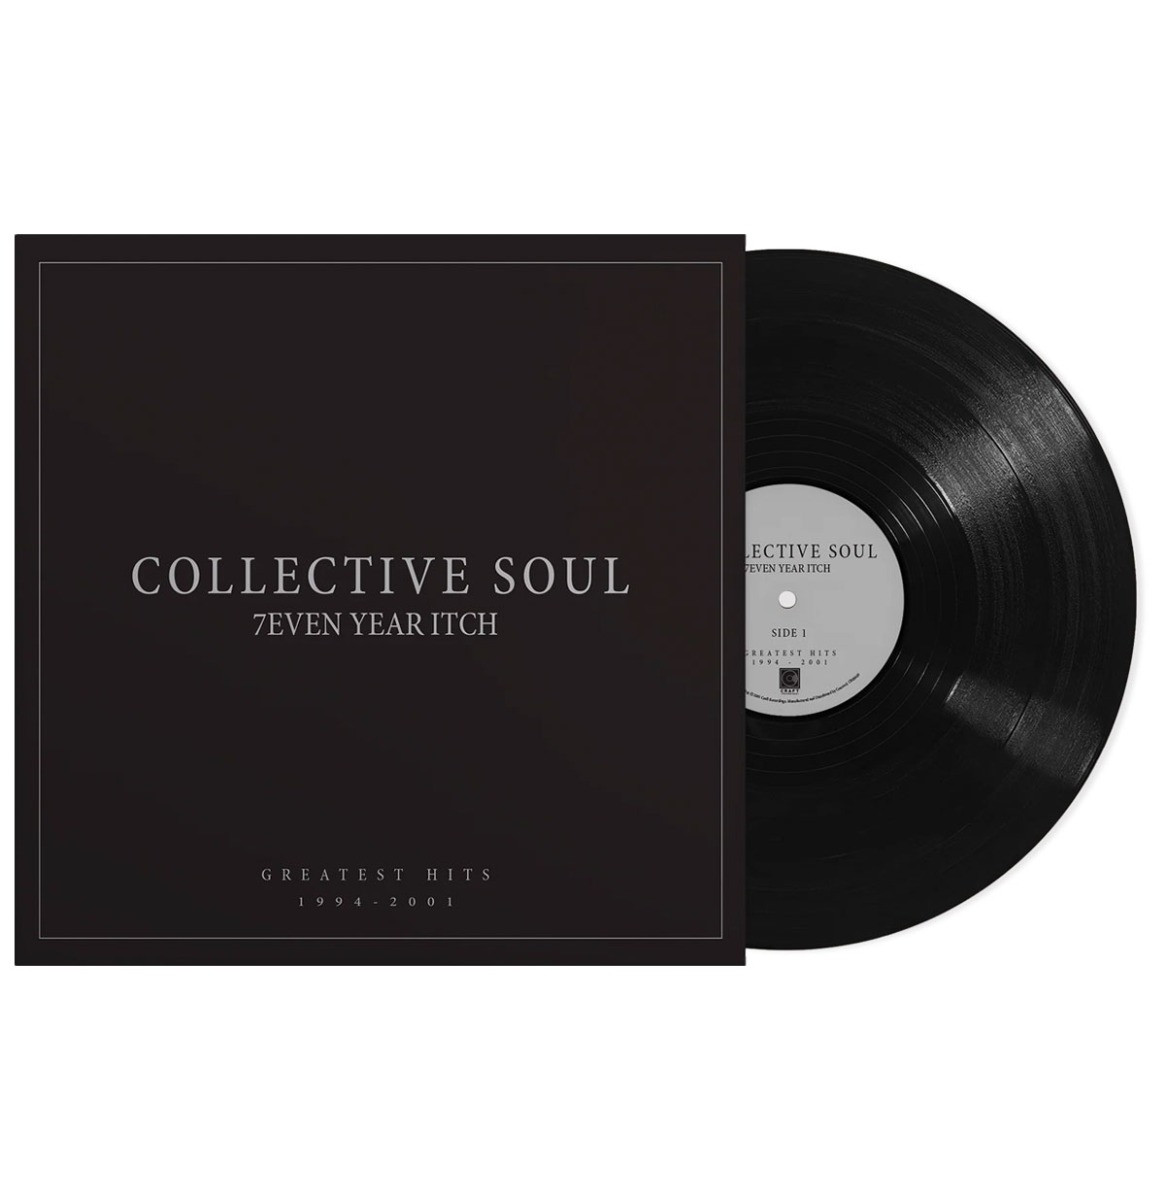 Collective Soul - 7even Year Itch: Greatest Hits 1994-2001 LP